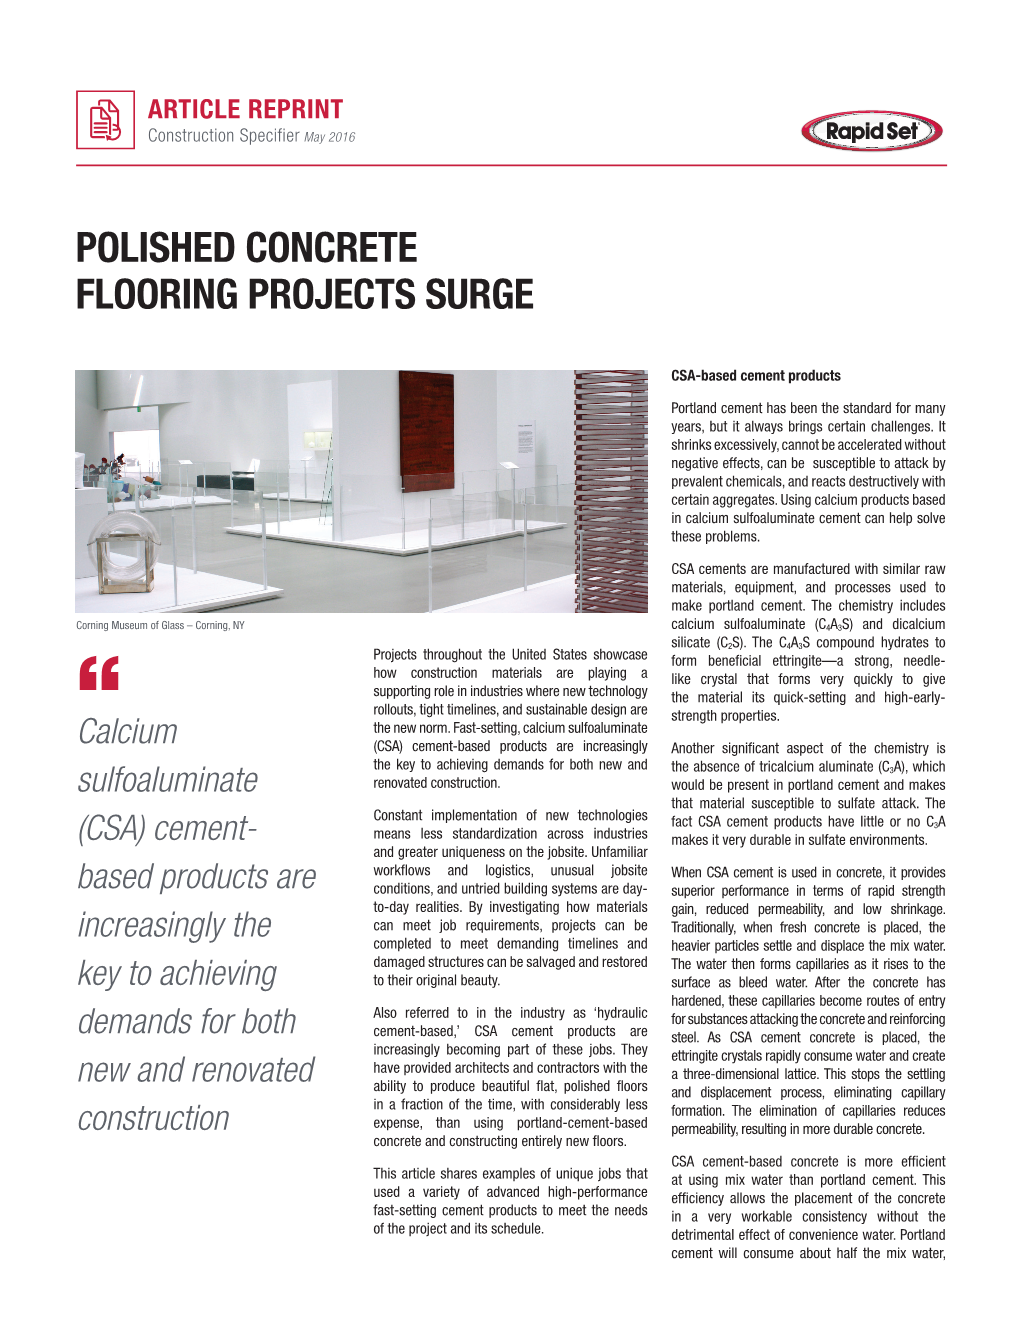 Polished Concrete Flooring Projects Surge